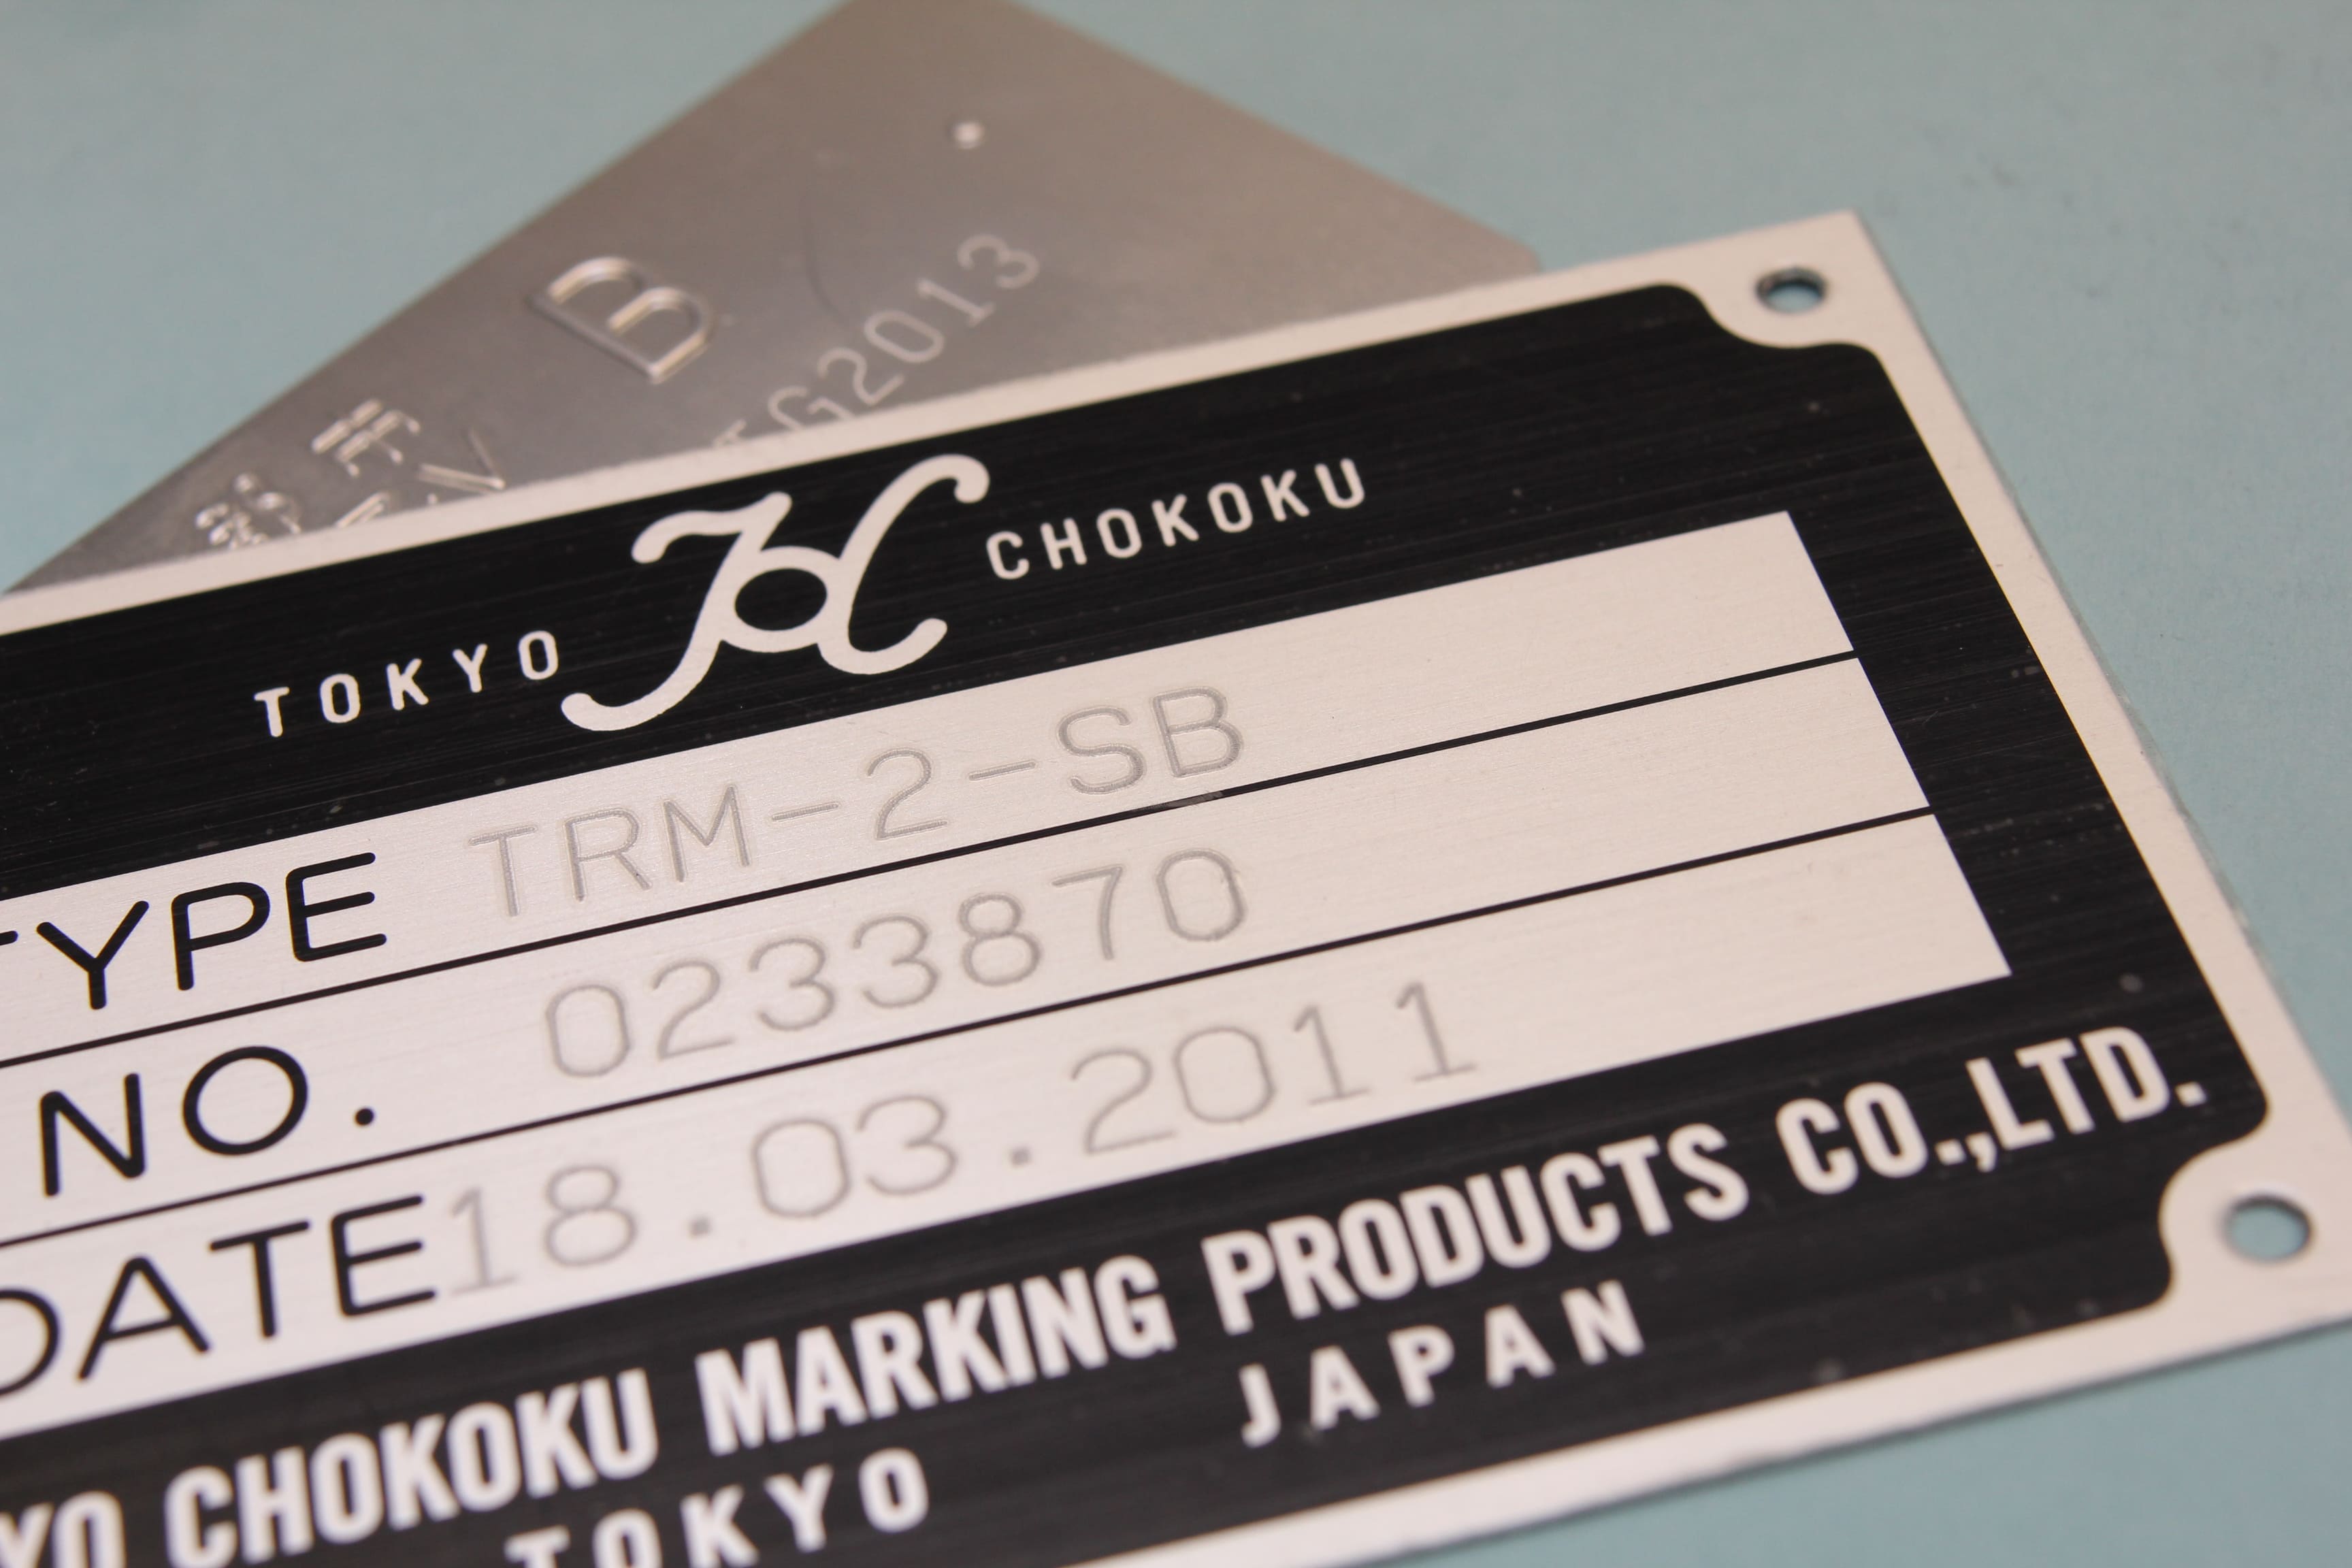 Image of a nameplate engraved with 'TRM-2-SB' for type, '0233870' for number, '18.03.2011' for date, and 'TOKYO CHOKOKU' with logo.